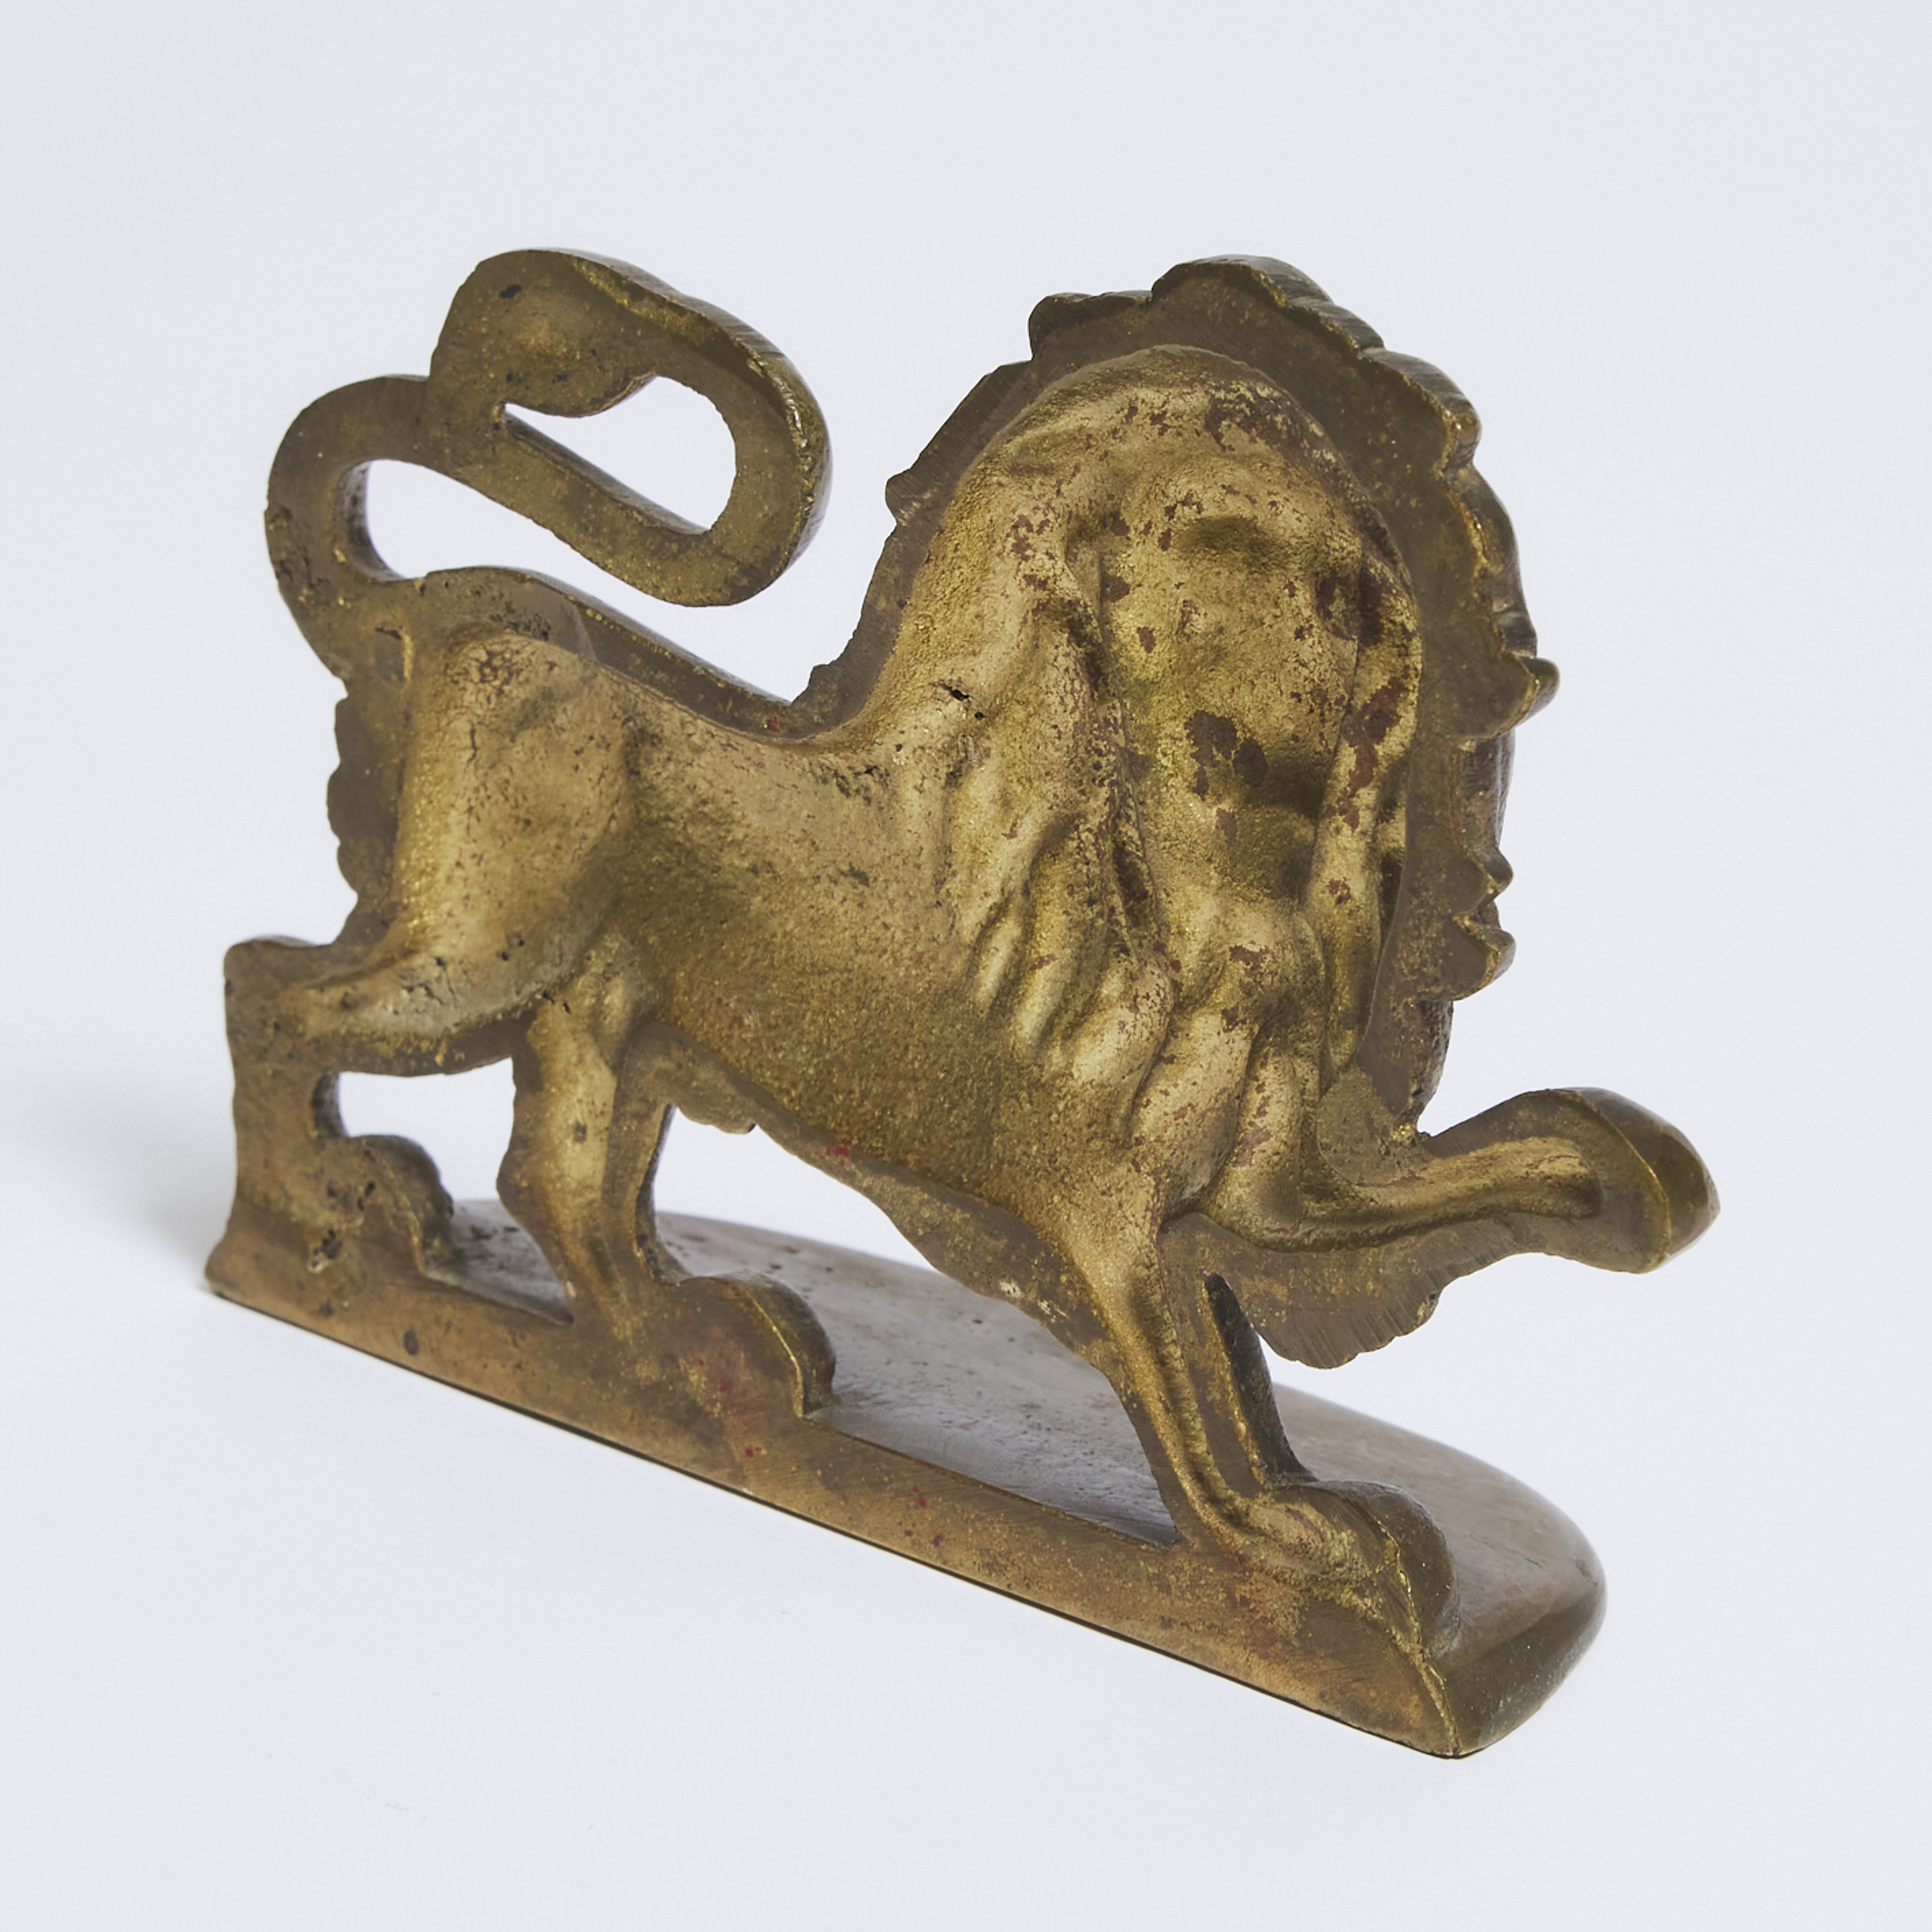 Gilt Bronze Lion Form Door Stop, 19th/early 20th century